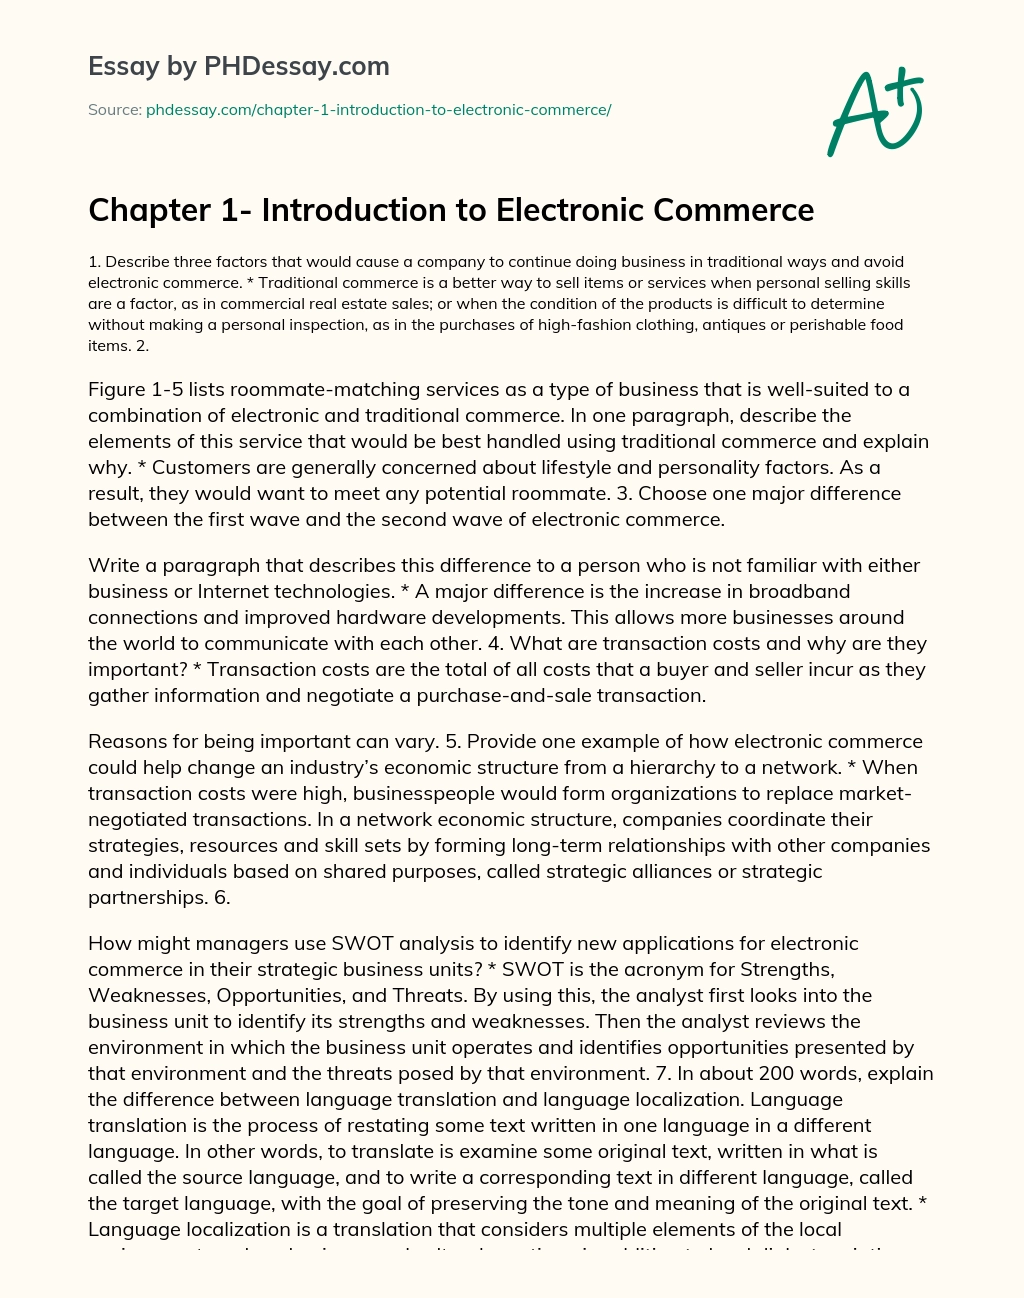 Реферат: Ecommerce Essay Research Paper Ecommerce Does this